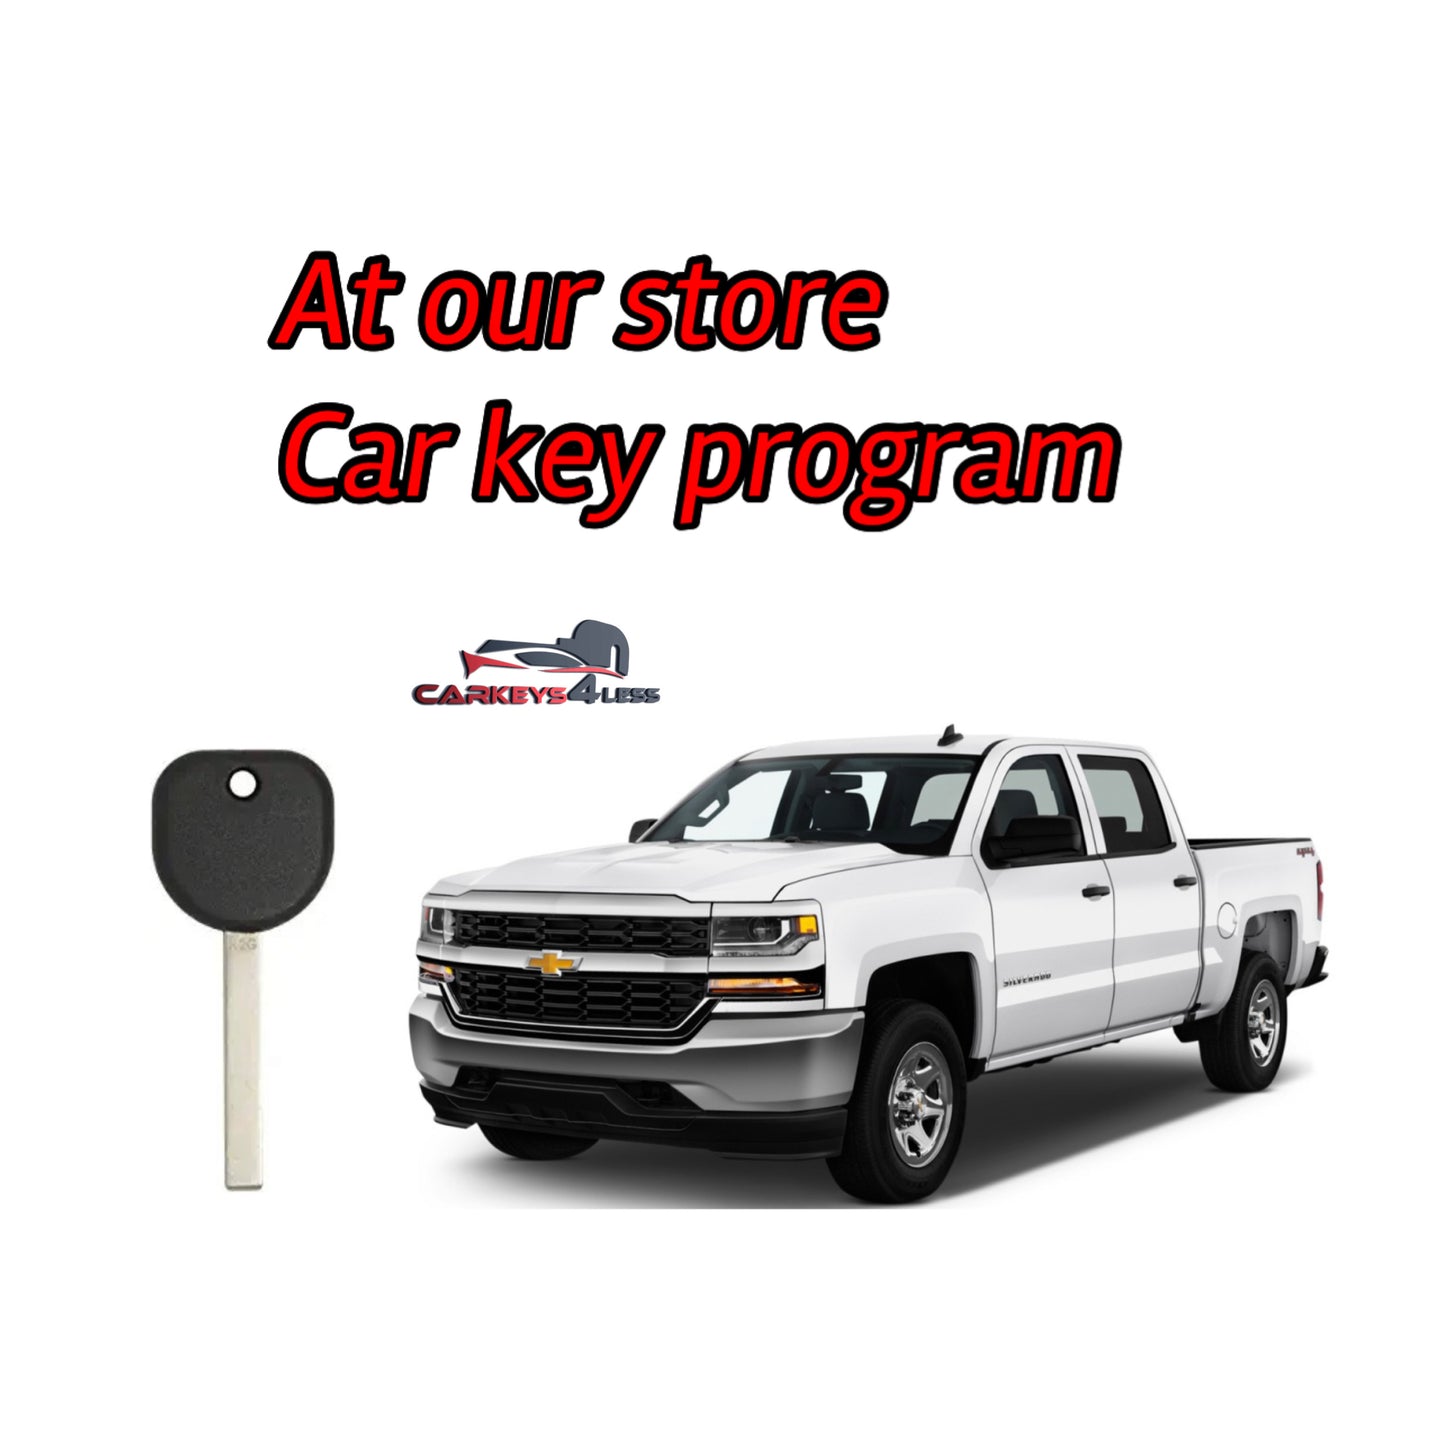 At our store gm car key replacement